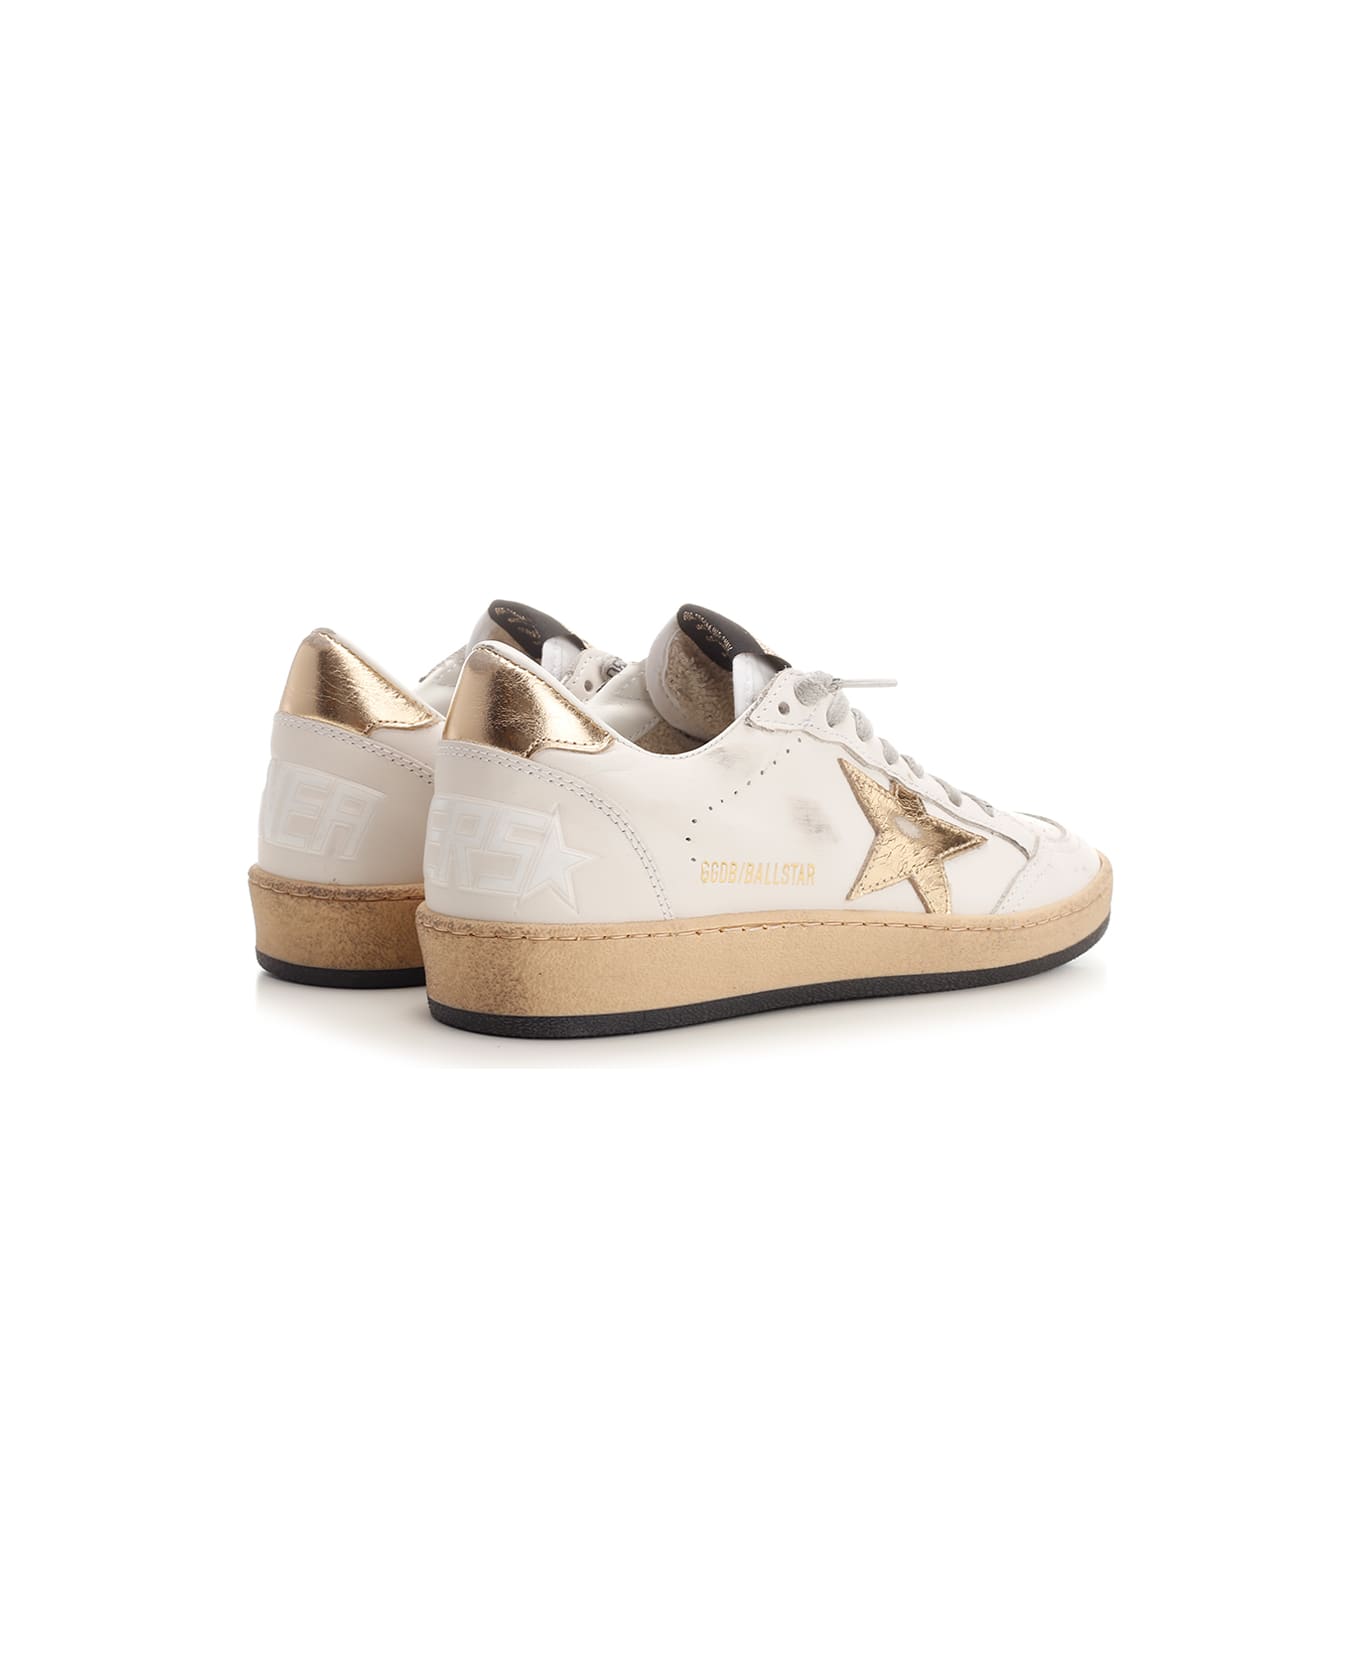 Golden Goose Ball Star Leather Sneakers - Milk/Gold